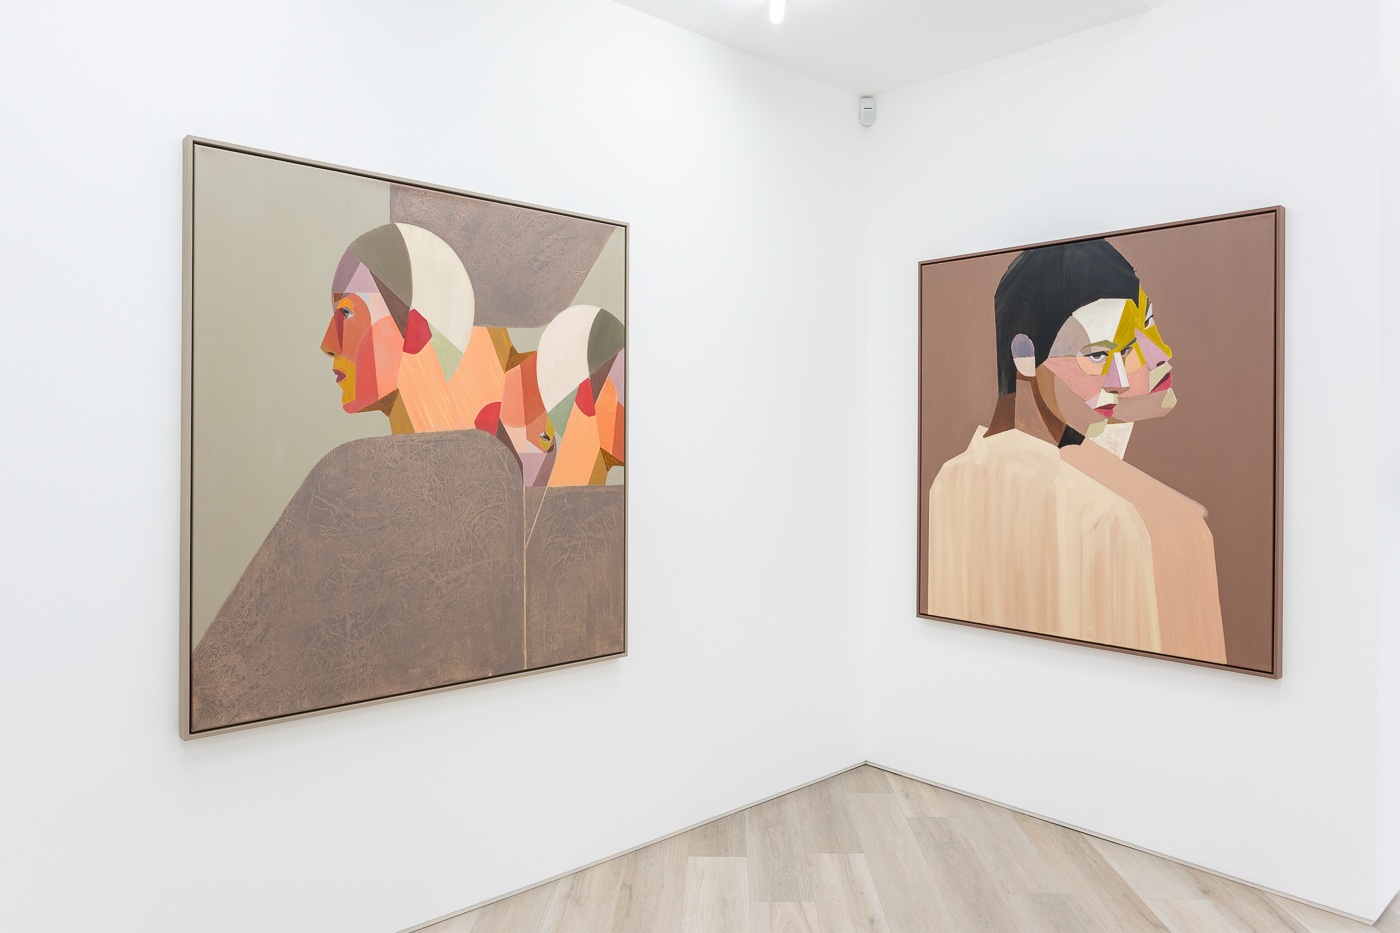 Installation image for Kat Kristof: Her & The Self, at BEERS London